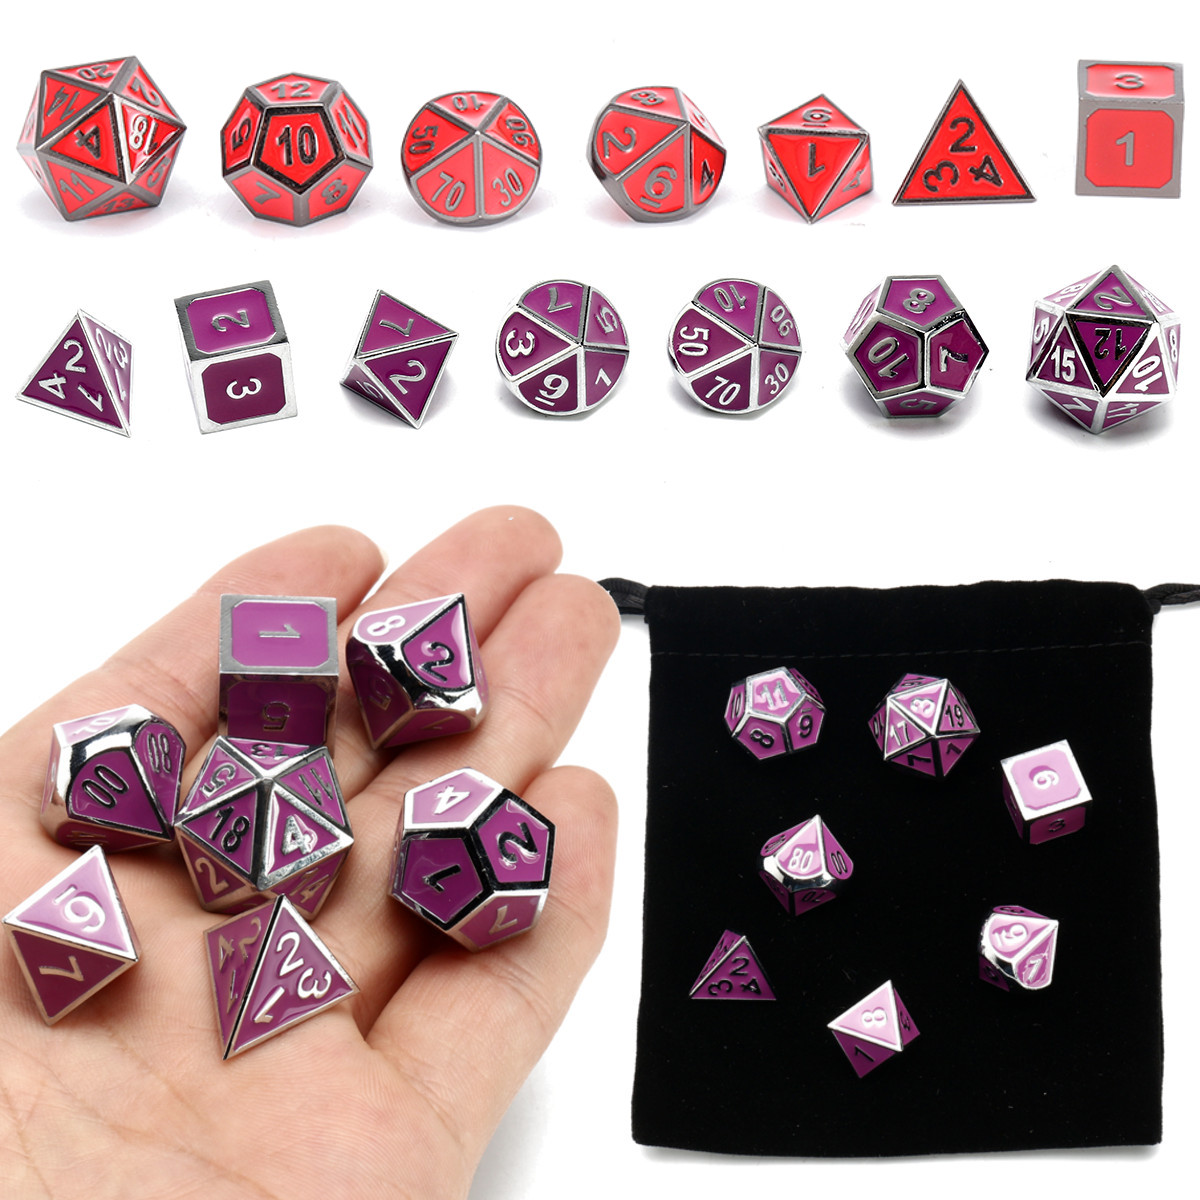 7-Pcs-Multisided-Dice-Heavy-Metal-Polyhedral-Dice-Set-Role-Playing-Games-Dices-with-Bag-1263009-1